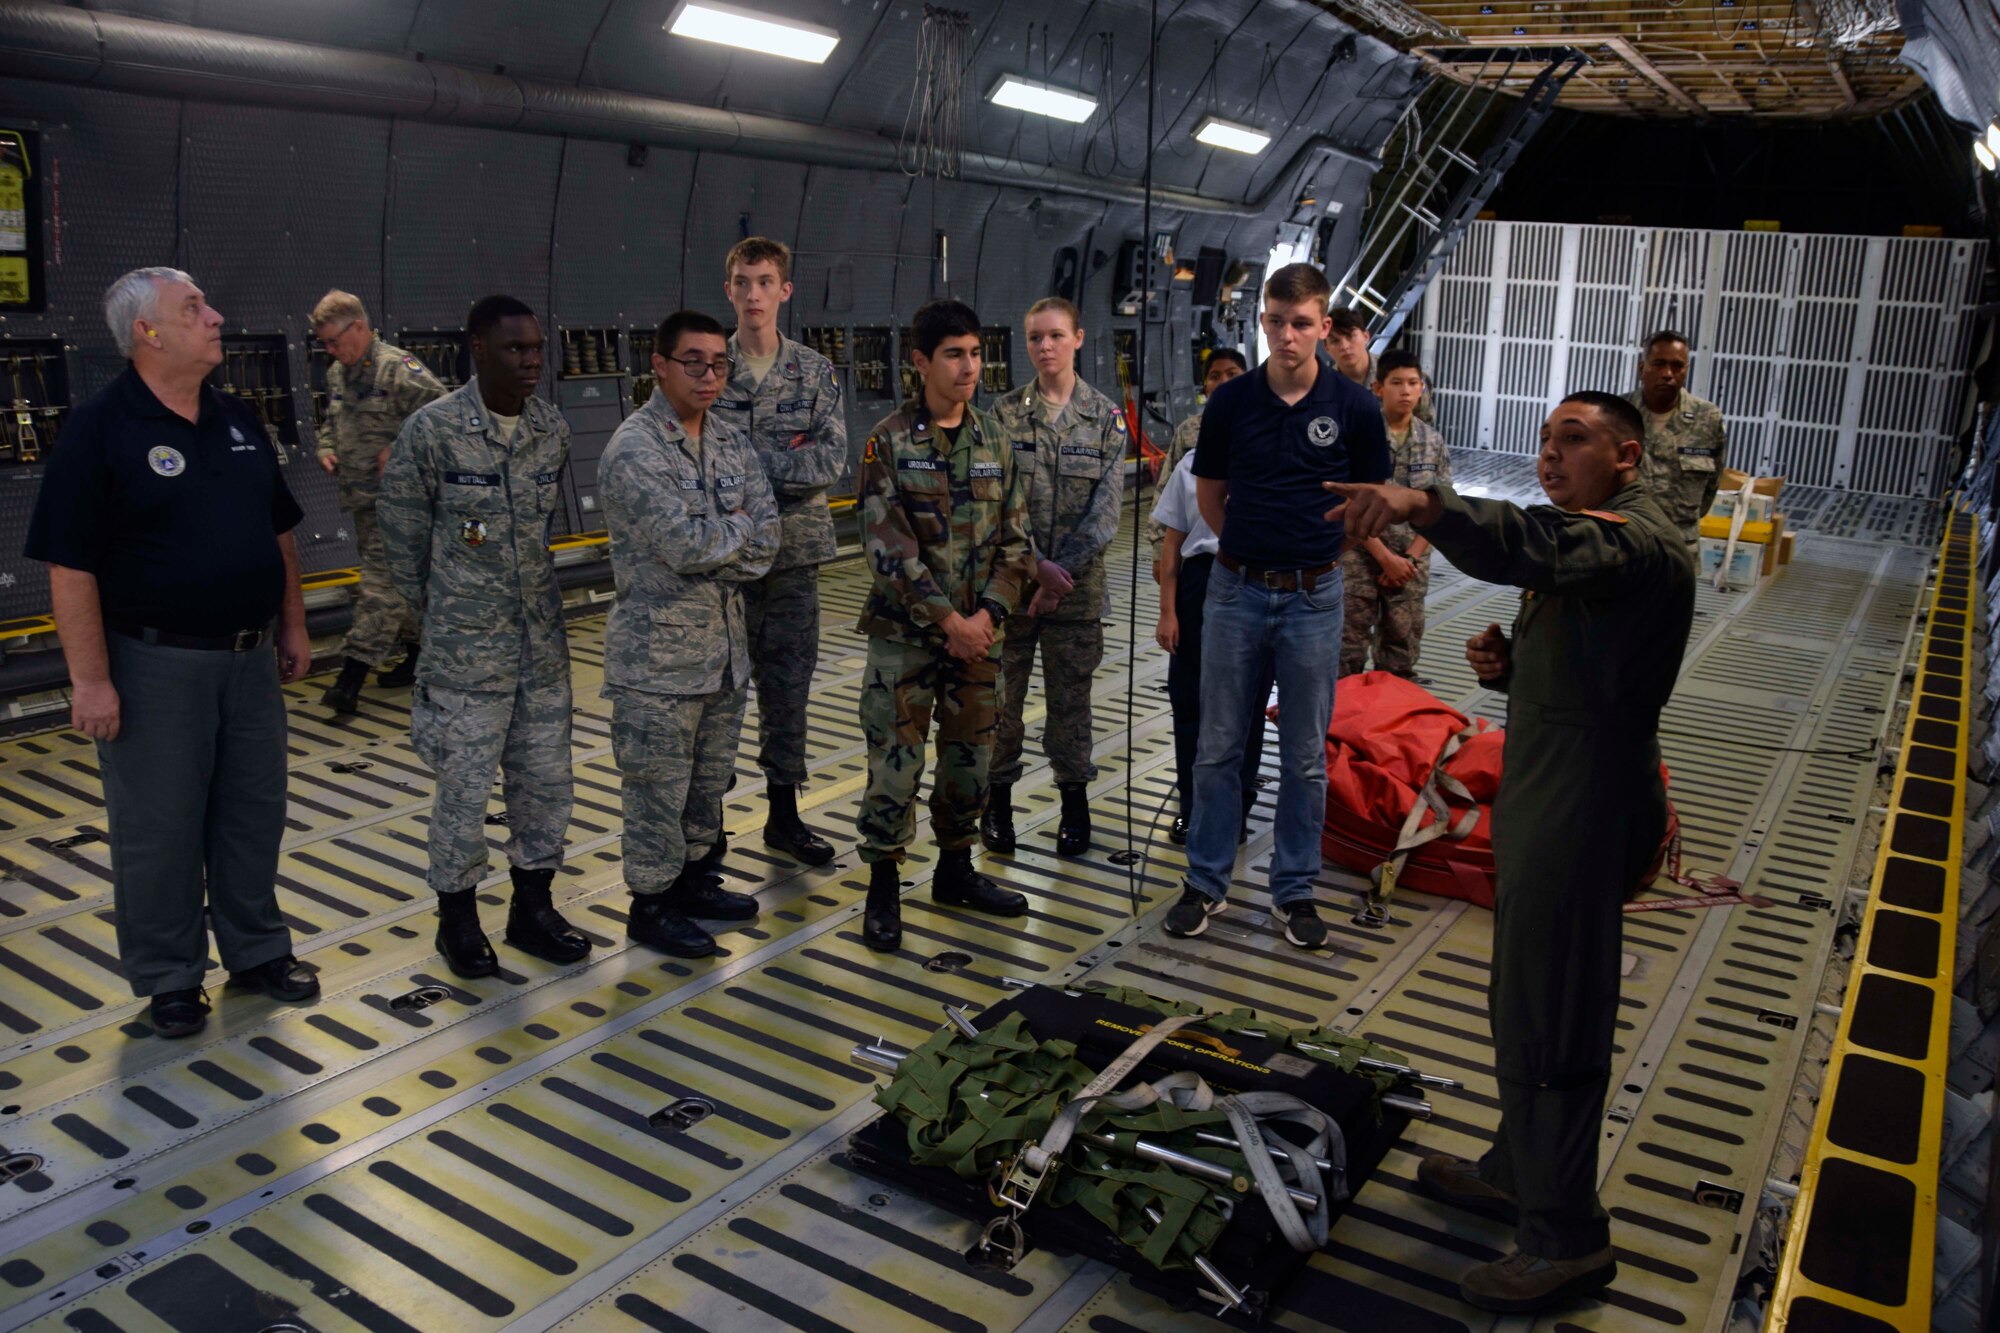 Senior Airman Thomas G. Wawrzyniak, 68th Airlift Squadron loadmaster, talks about the C-5M Super Galaxy’s cargo compartment with Civil Air Patrol cadets Nov. 6, 2019 at Joint Base San Antonio-Lackland, Texas (U.S. Air Force photo by Staff Sgt. Lauren M. Snyder)